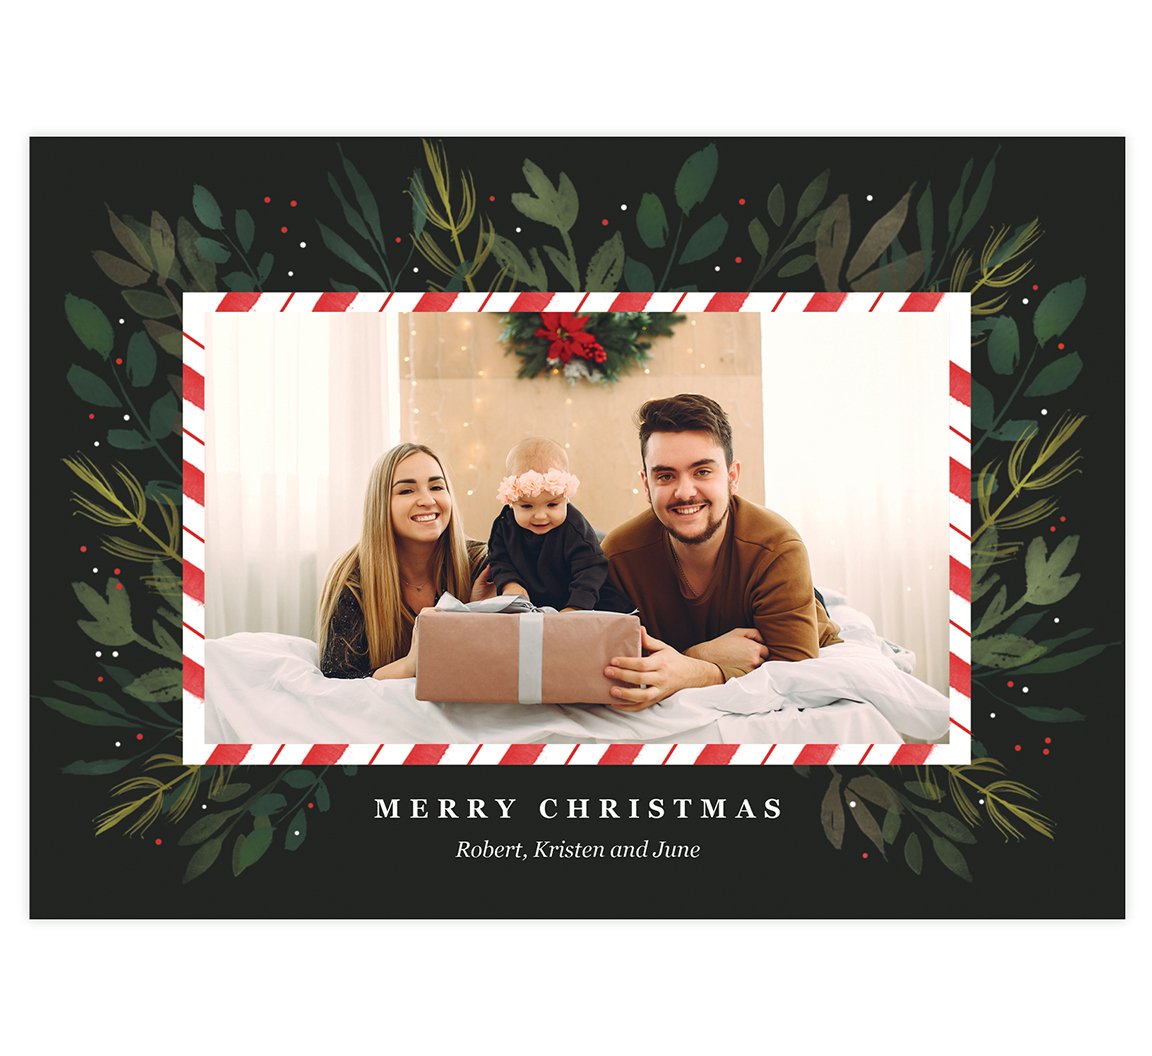 Candy Cane Frame Holiday Card; Dark backgrond, one image spot with a candy cane design frame around the image and watercolor greenery around the frame.